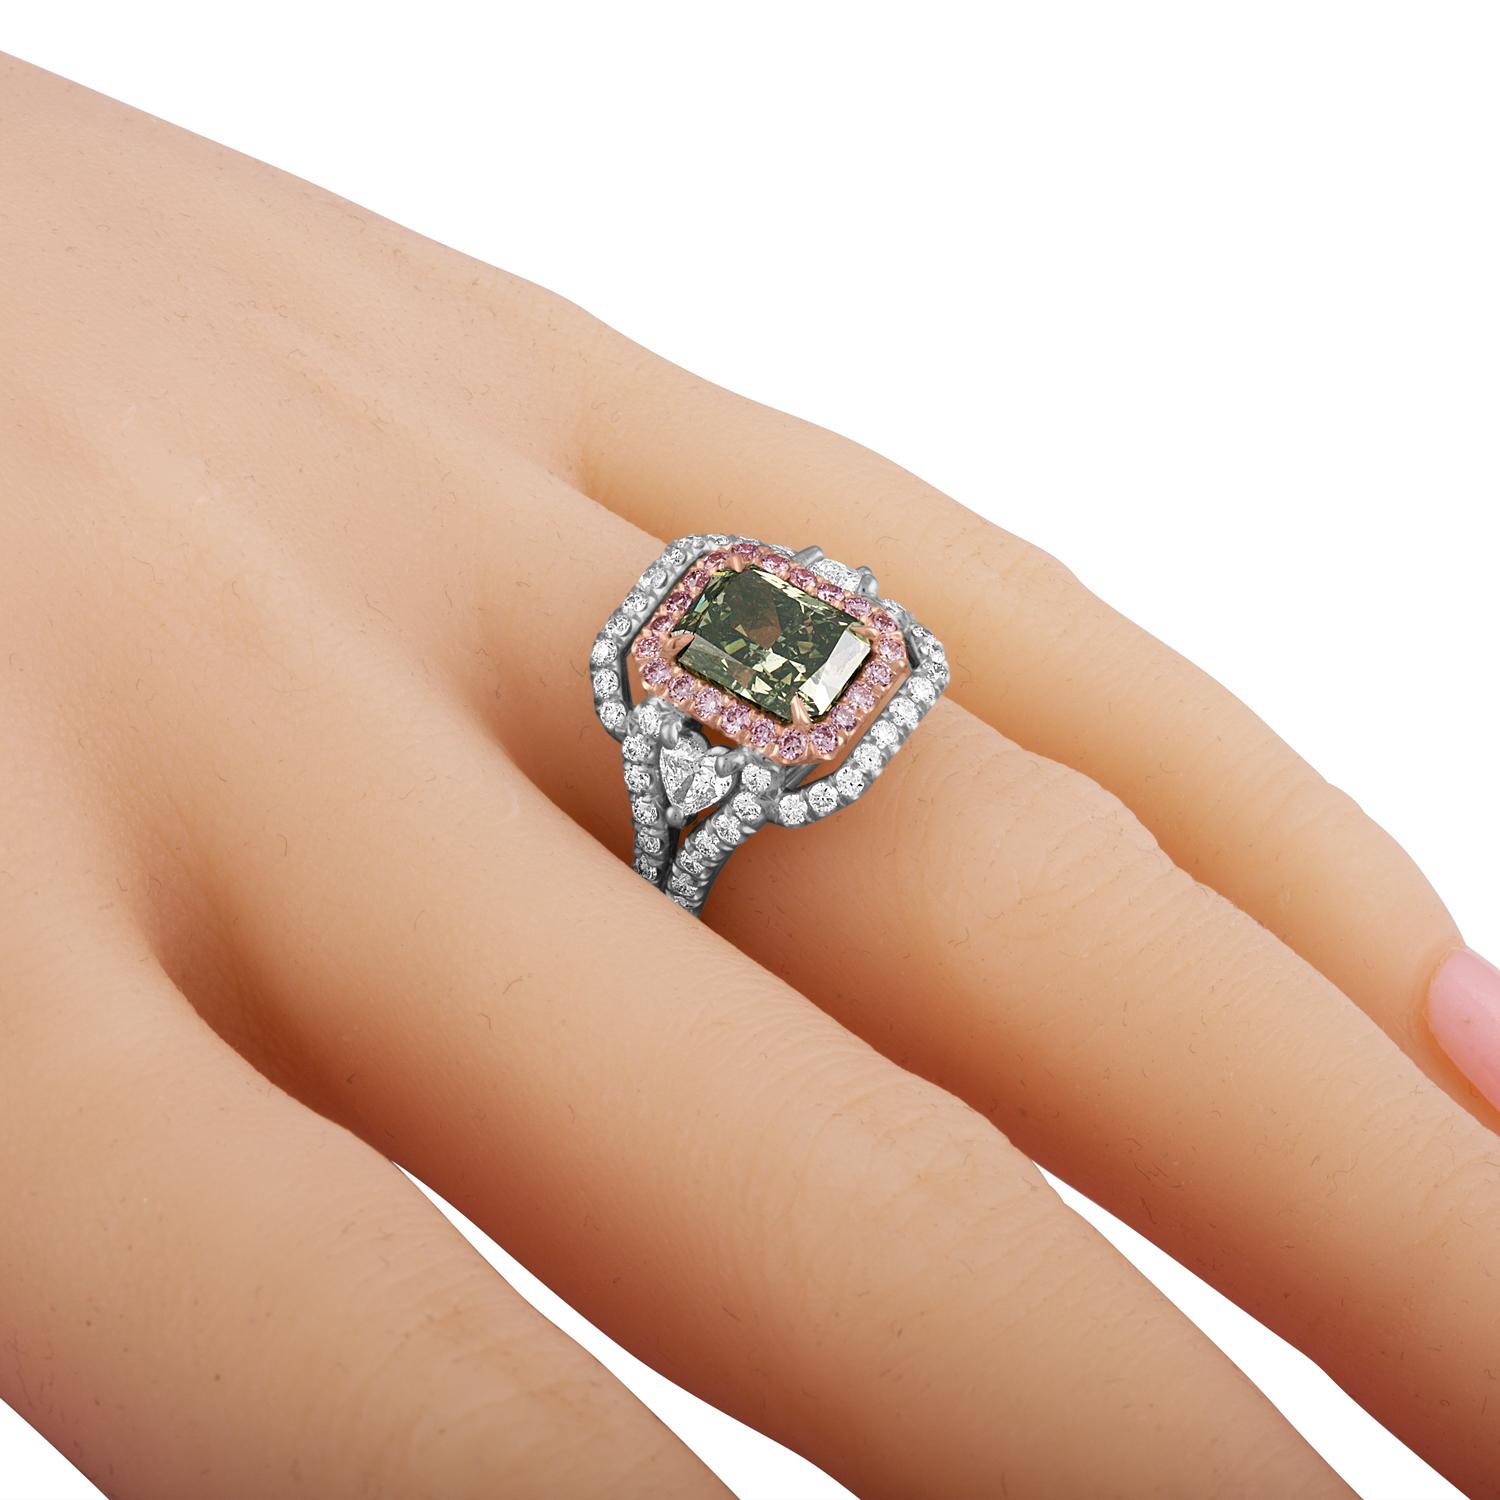 Hand made Platinum Ring for a Radiant Diamond. Radiant in color and in shape. the Deep Green Diamond is set in the center of the ring. Surrounded by a row of Pink Diamonds, 22 Round Brilliants 0.27 Carat Total Weight. The Pink row is surrounded by a